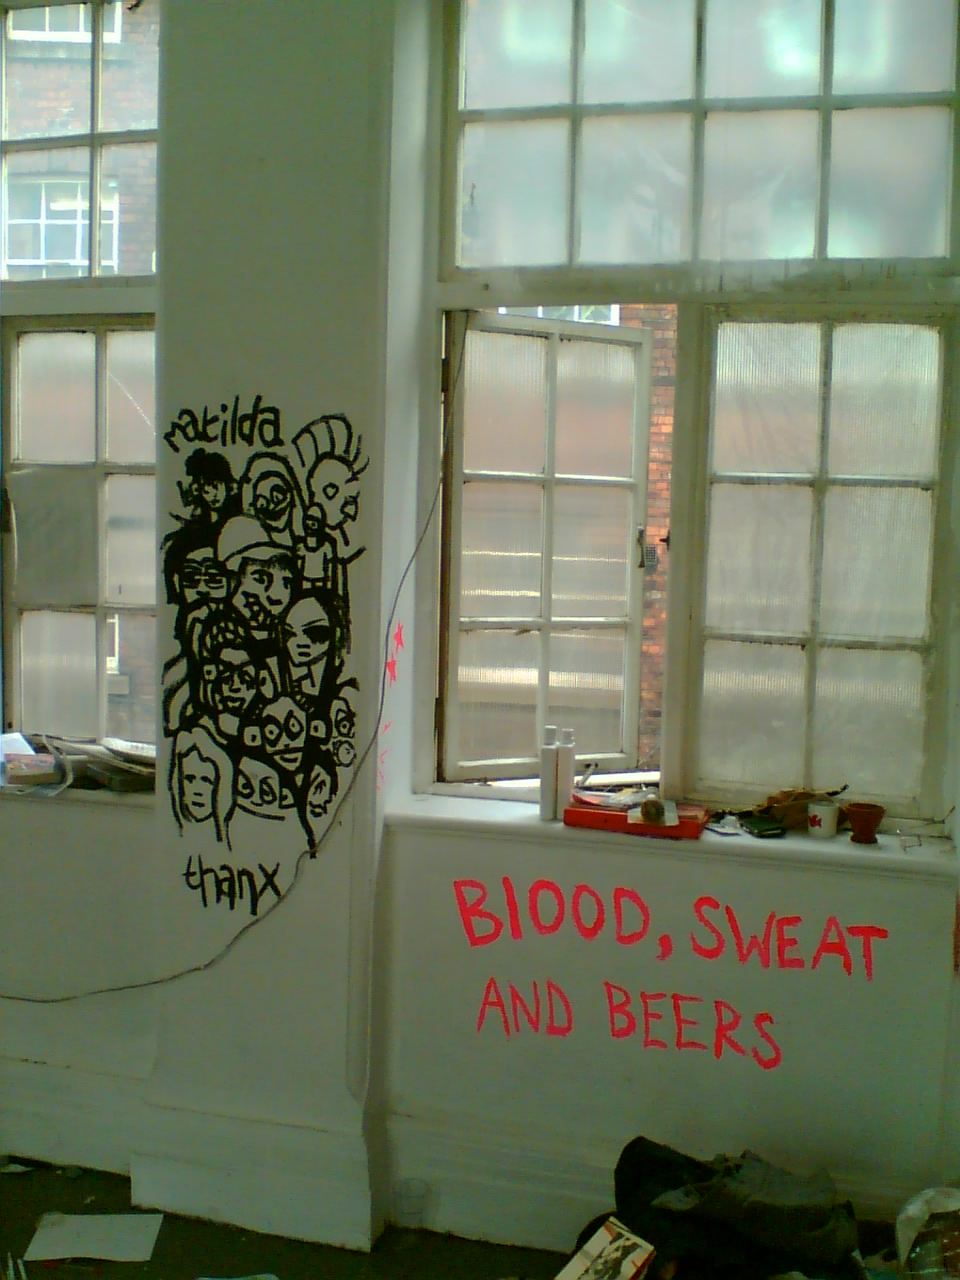 thanx MATILDA - blood sweat and beers!